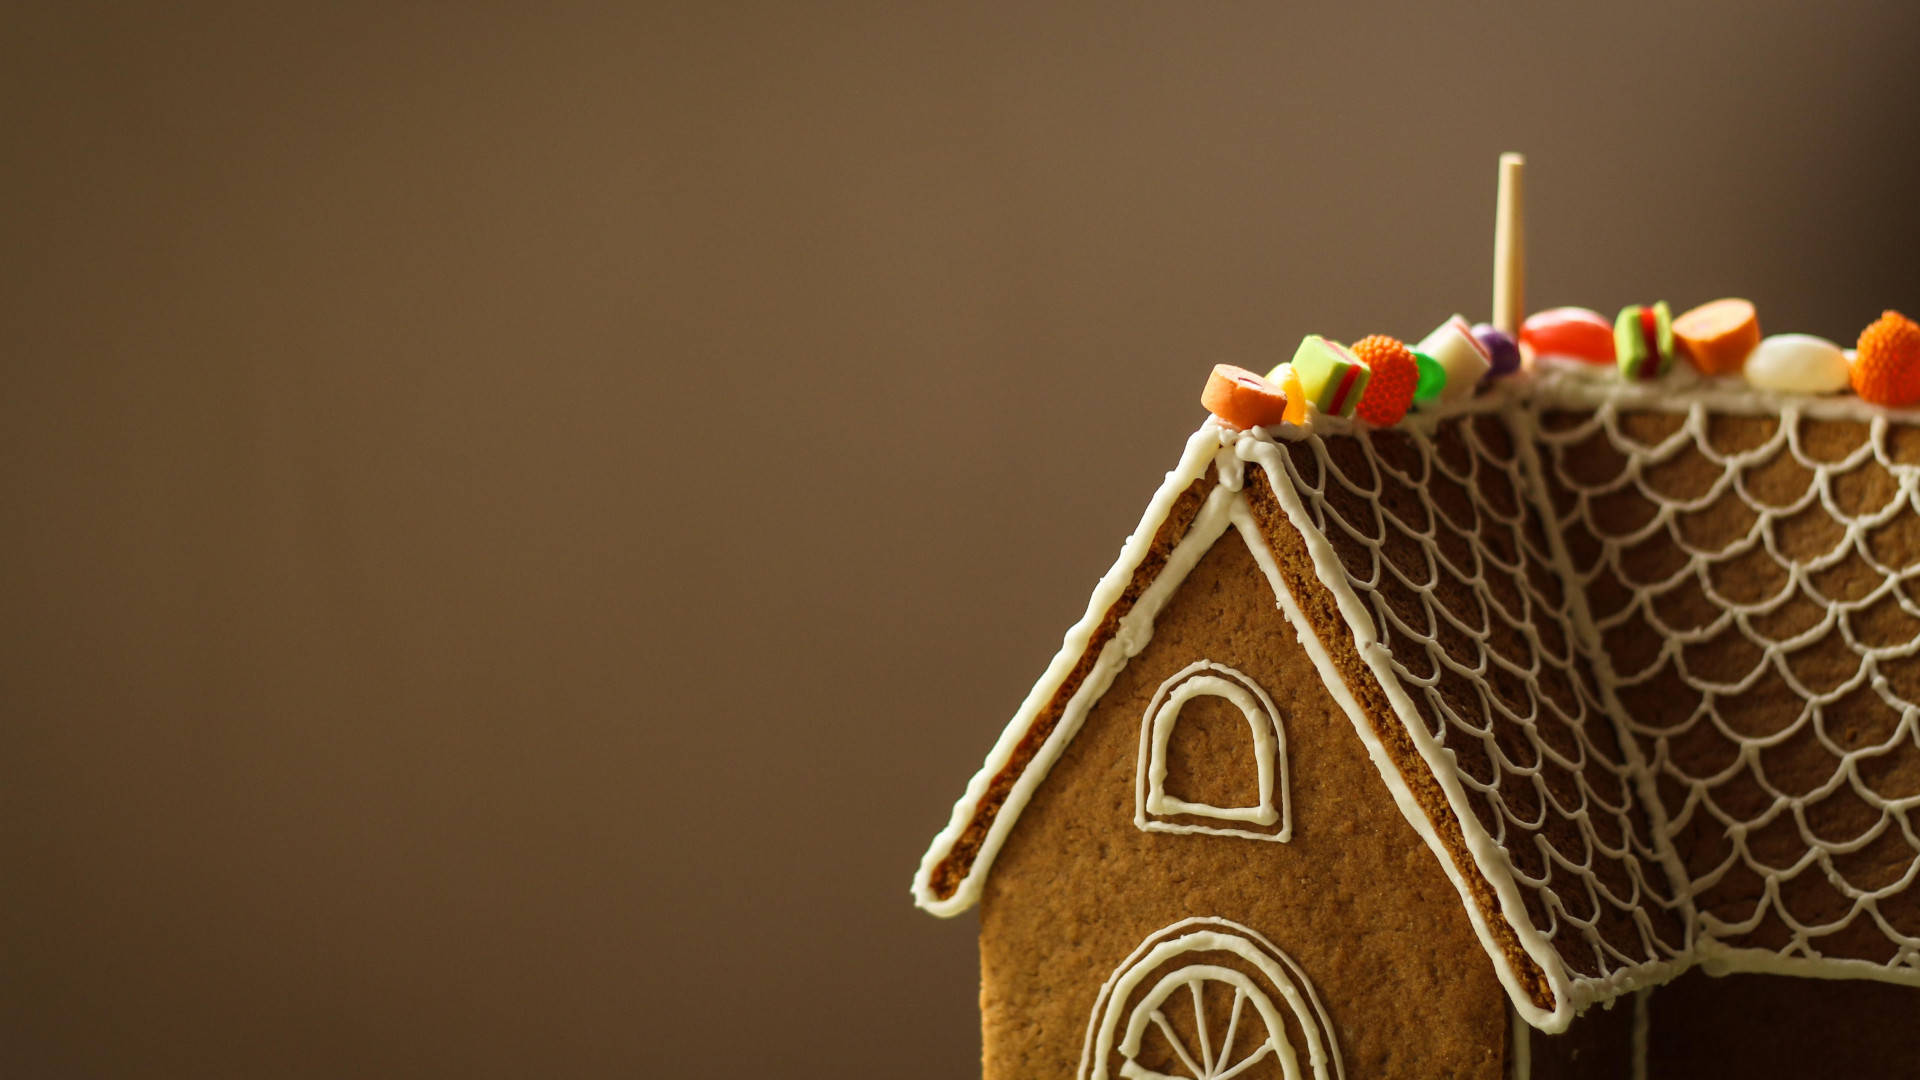 Cathedral Gingerbread House Design Wallpaper